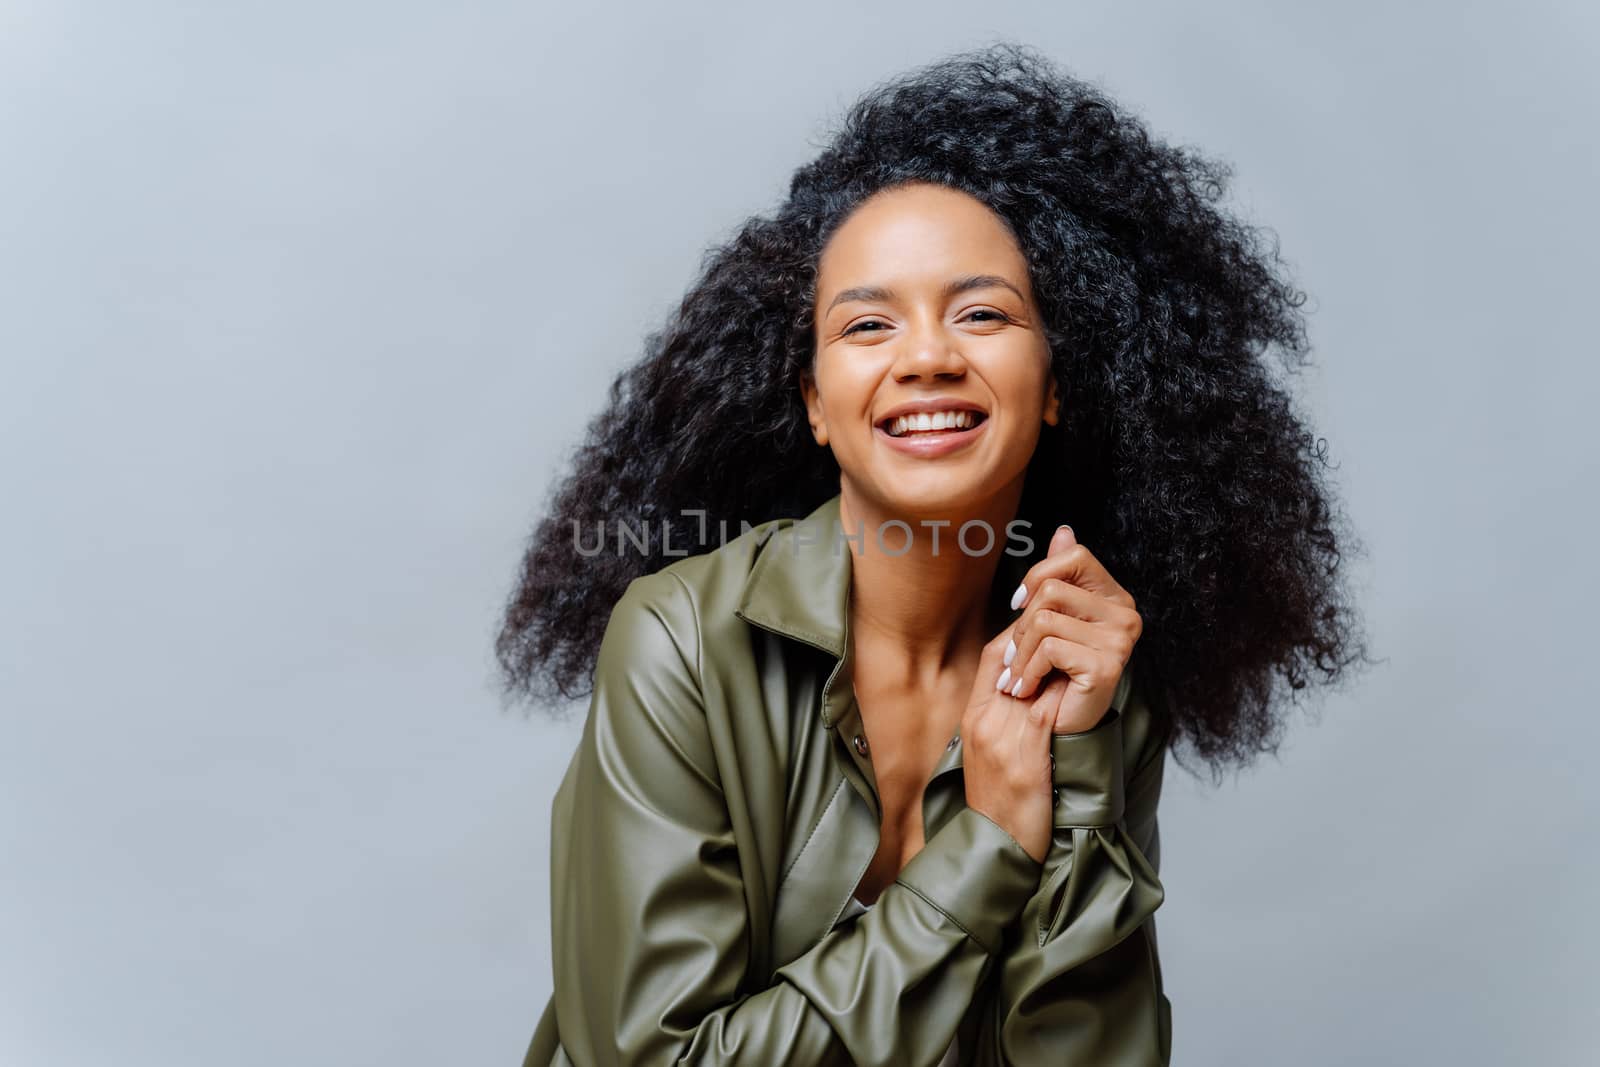 Joyful woman with dark skin, Afro hairstyle, keeps hands together, smiles sincerely at camera, shows white teeth, wears leather shirt, poses over grey background. People, emotions, ethnicity by vkstock